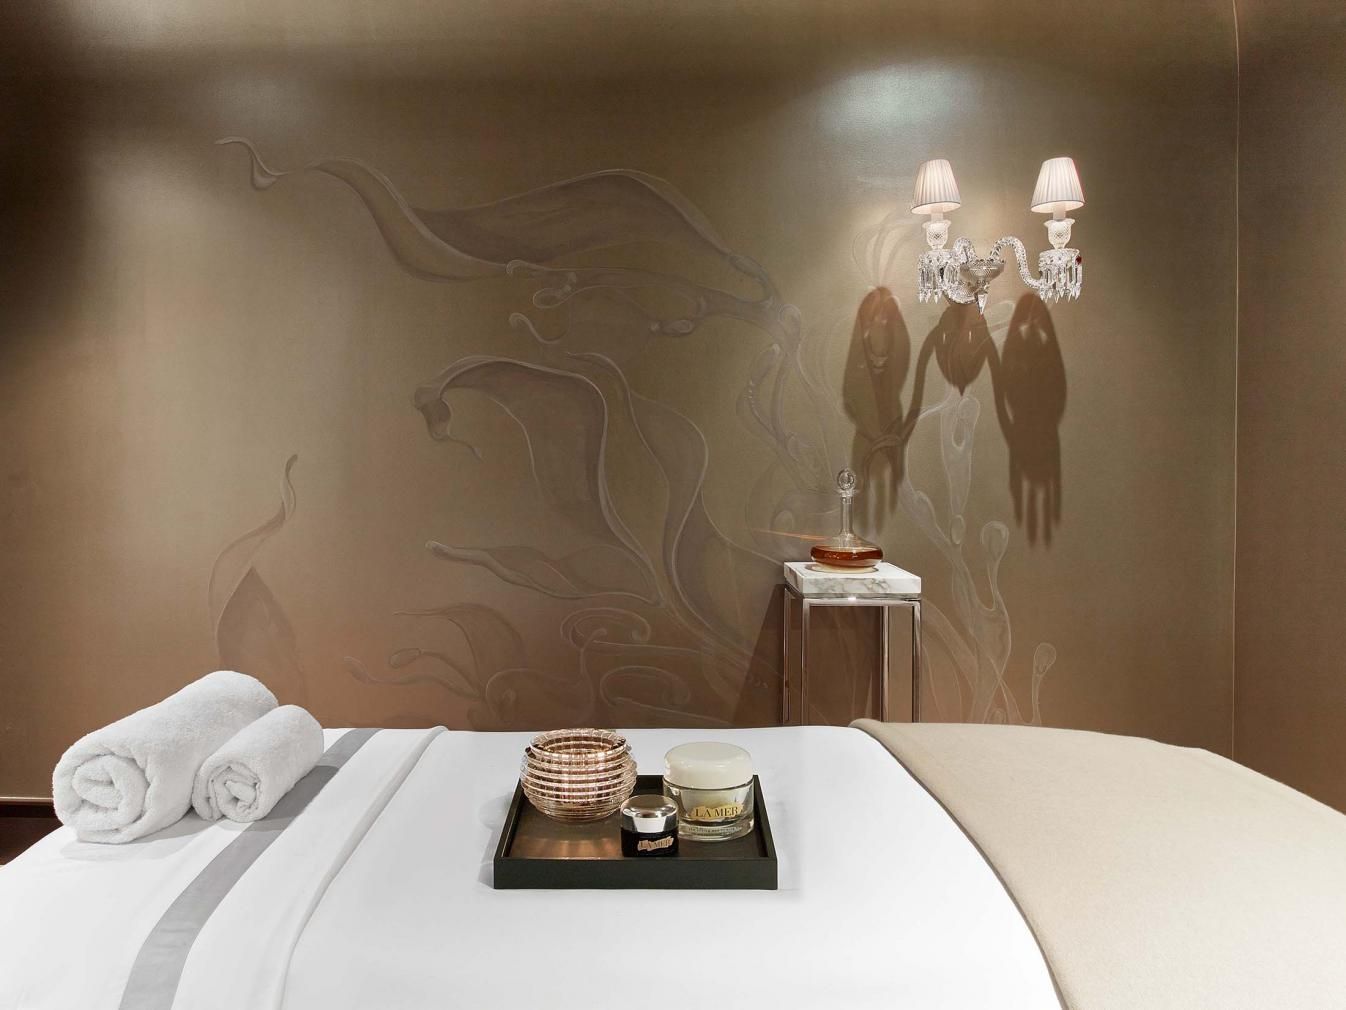 Spa bed with a tray of scented candles in the centre